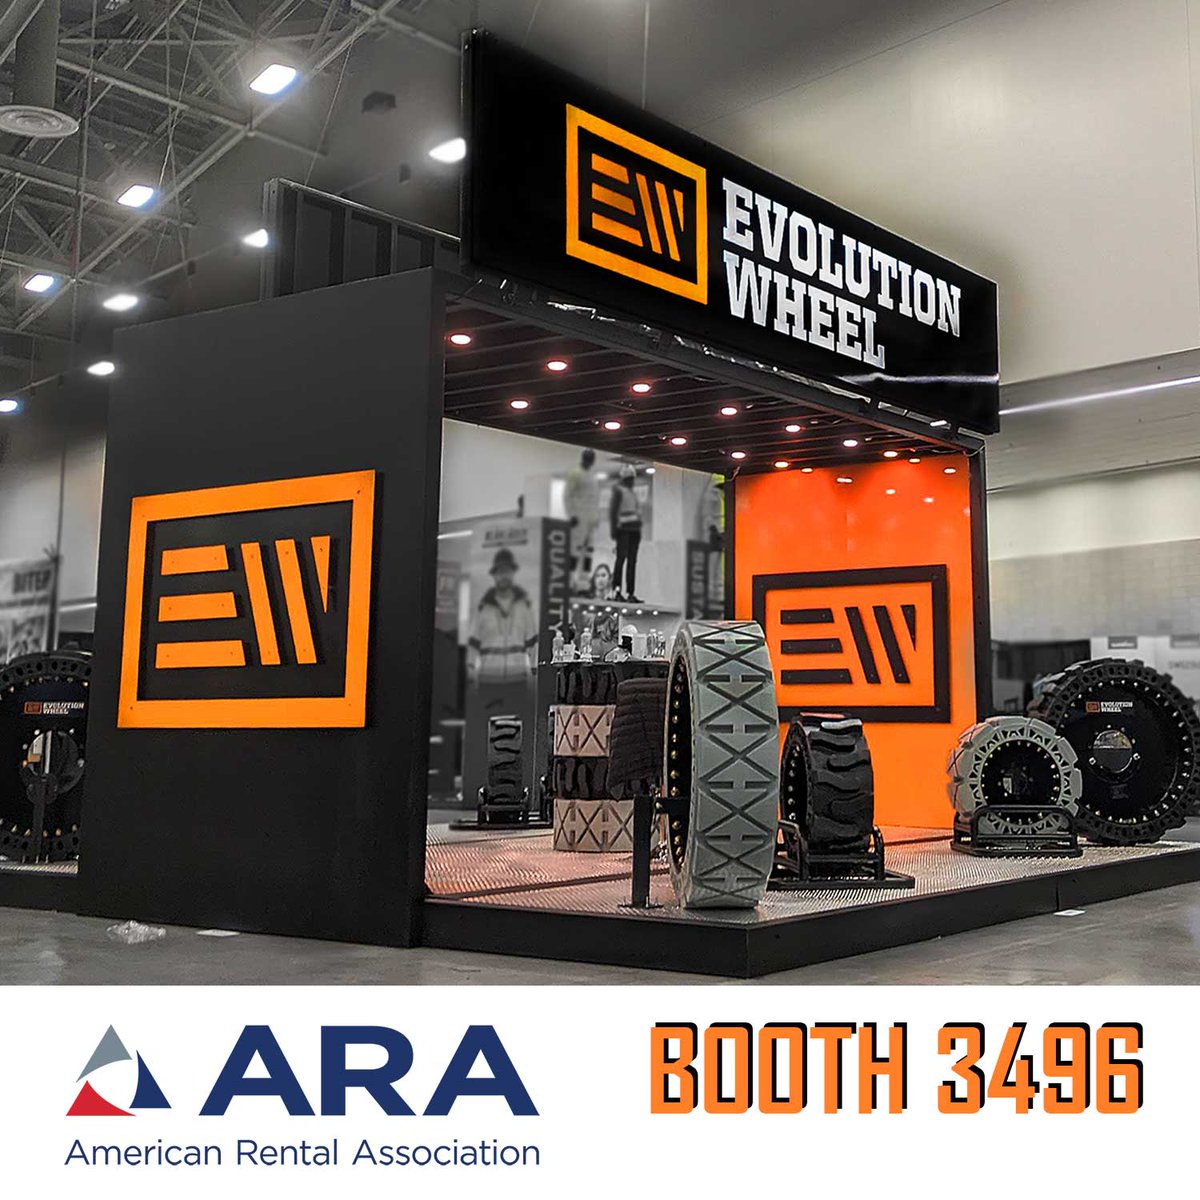 Wheels that perform, evolve and lead the way! Evolution Wheel will be showcasing our latest and greatest at the ARA Show. Come see us at booth #3496.
 #ARAShow #EvolutionWheel